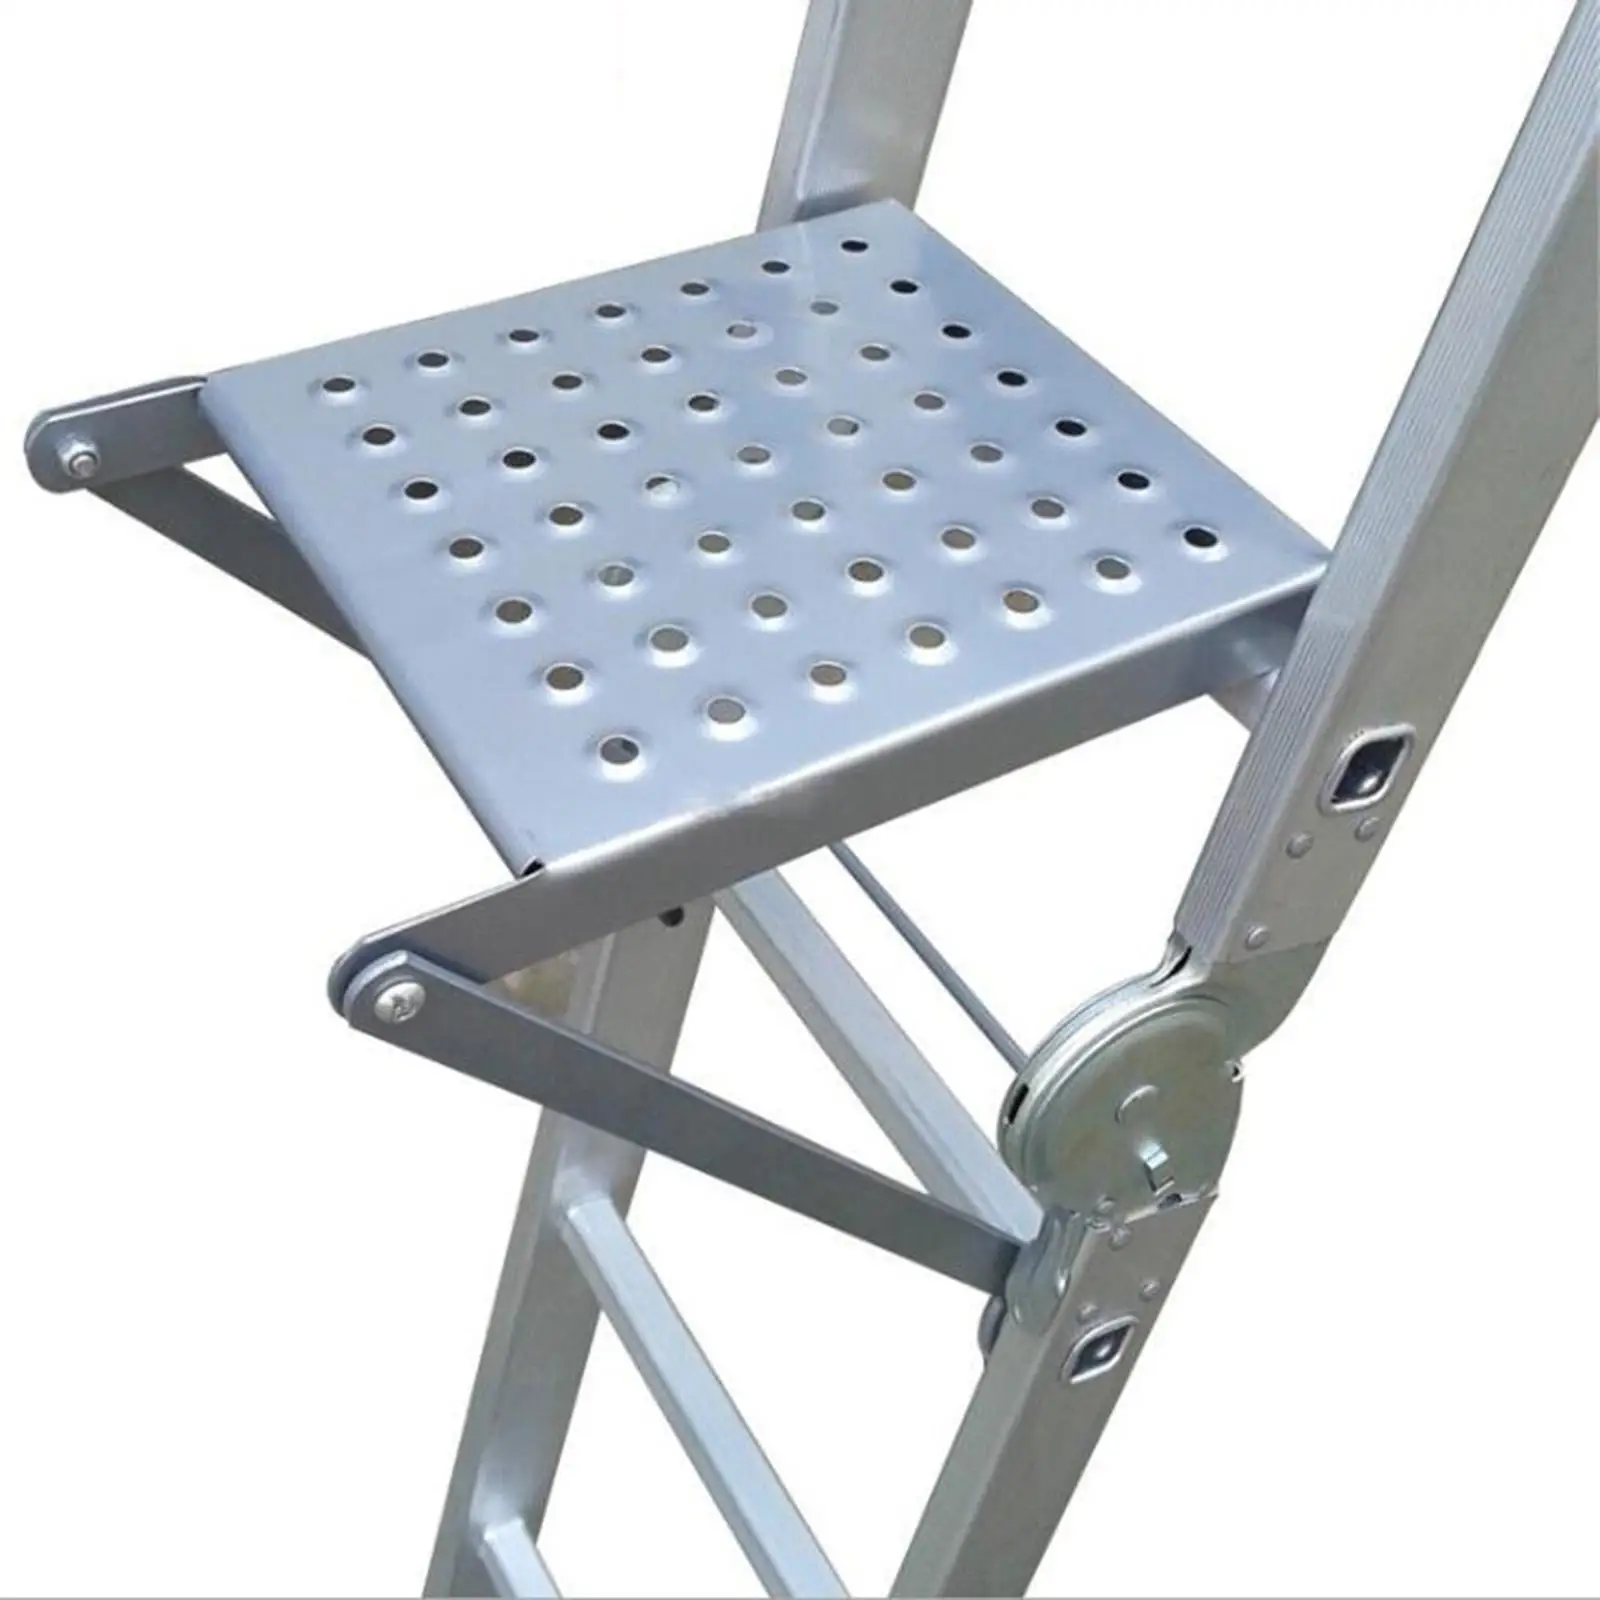 Ladder Work Platform Durable Wide Pedal Practical Attachment Work Ladder Tray for Pantry Kitchen Office Household Painters